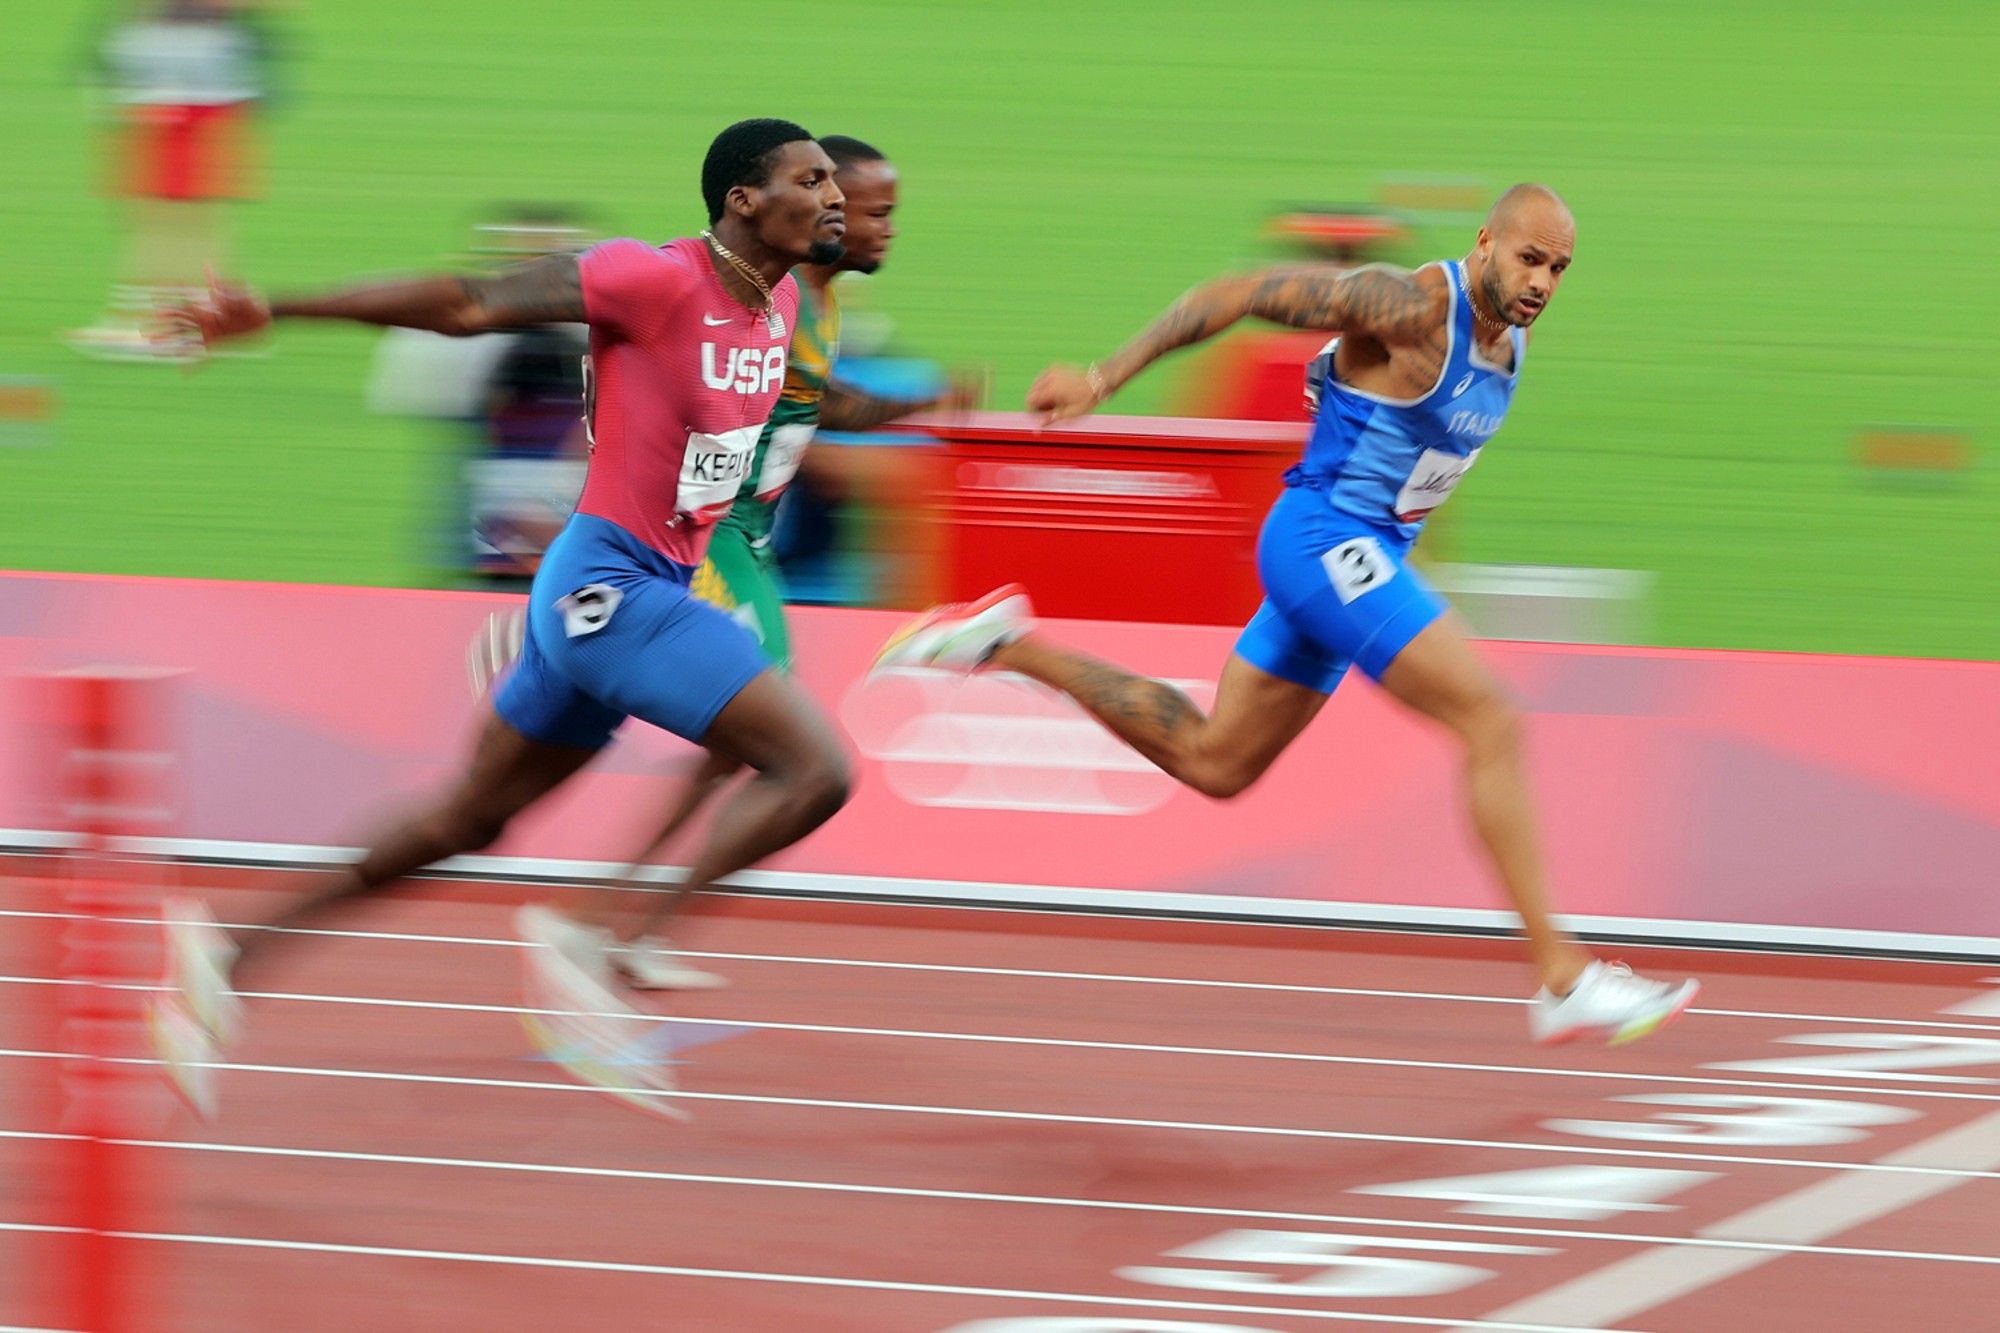 Italy's Lamont Marcell Jacobs wins the gold medal in the men's 100m final at the Tokyo Olympics 